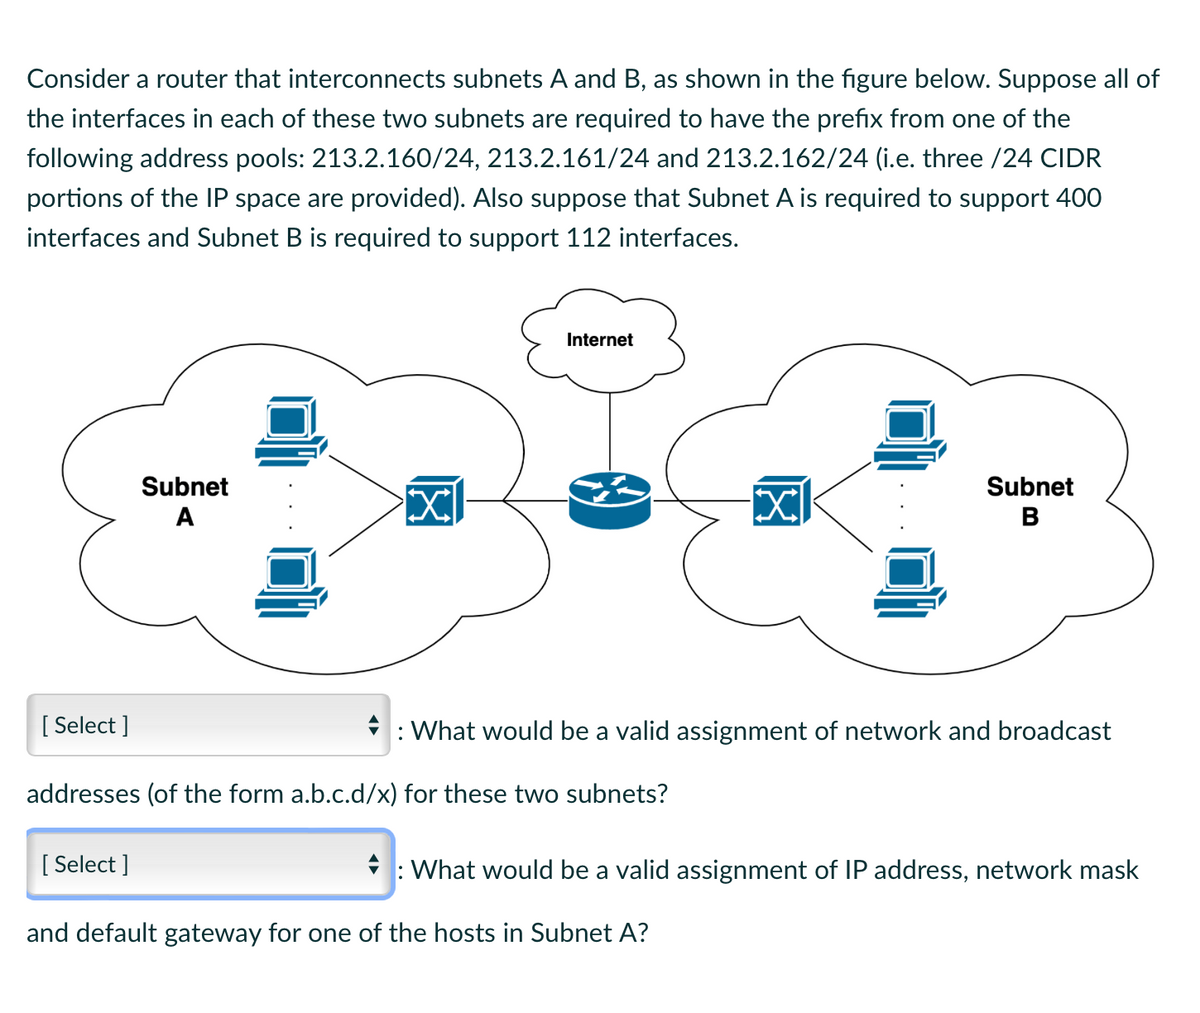 Consider a router that interconnects subnets A and B, as shown in the figure below. Suppose all of
the interfaces in each of these two subnets are required to have the prefix from one of the
following address pools: 213.2.160/24, 213.2.161/24 and 213.2.162/24 (i.e. three /24 CIDR
portions of the IP space are provided). Also suppose that Subnet A is required to support 400
interfaces and Subnet B is required to support 112 interfaces.
[Select]
Subnet
A
[Select]
X
Internet
addresses (of the form a.b.c.d/x) for these two subnets?
XI
: What would be a valid assignment of network and broadcast
Subnet
B
and default gateway for one of the hosts in Subnet A?
: What would be a valid assignment of IP address, network mask